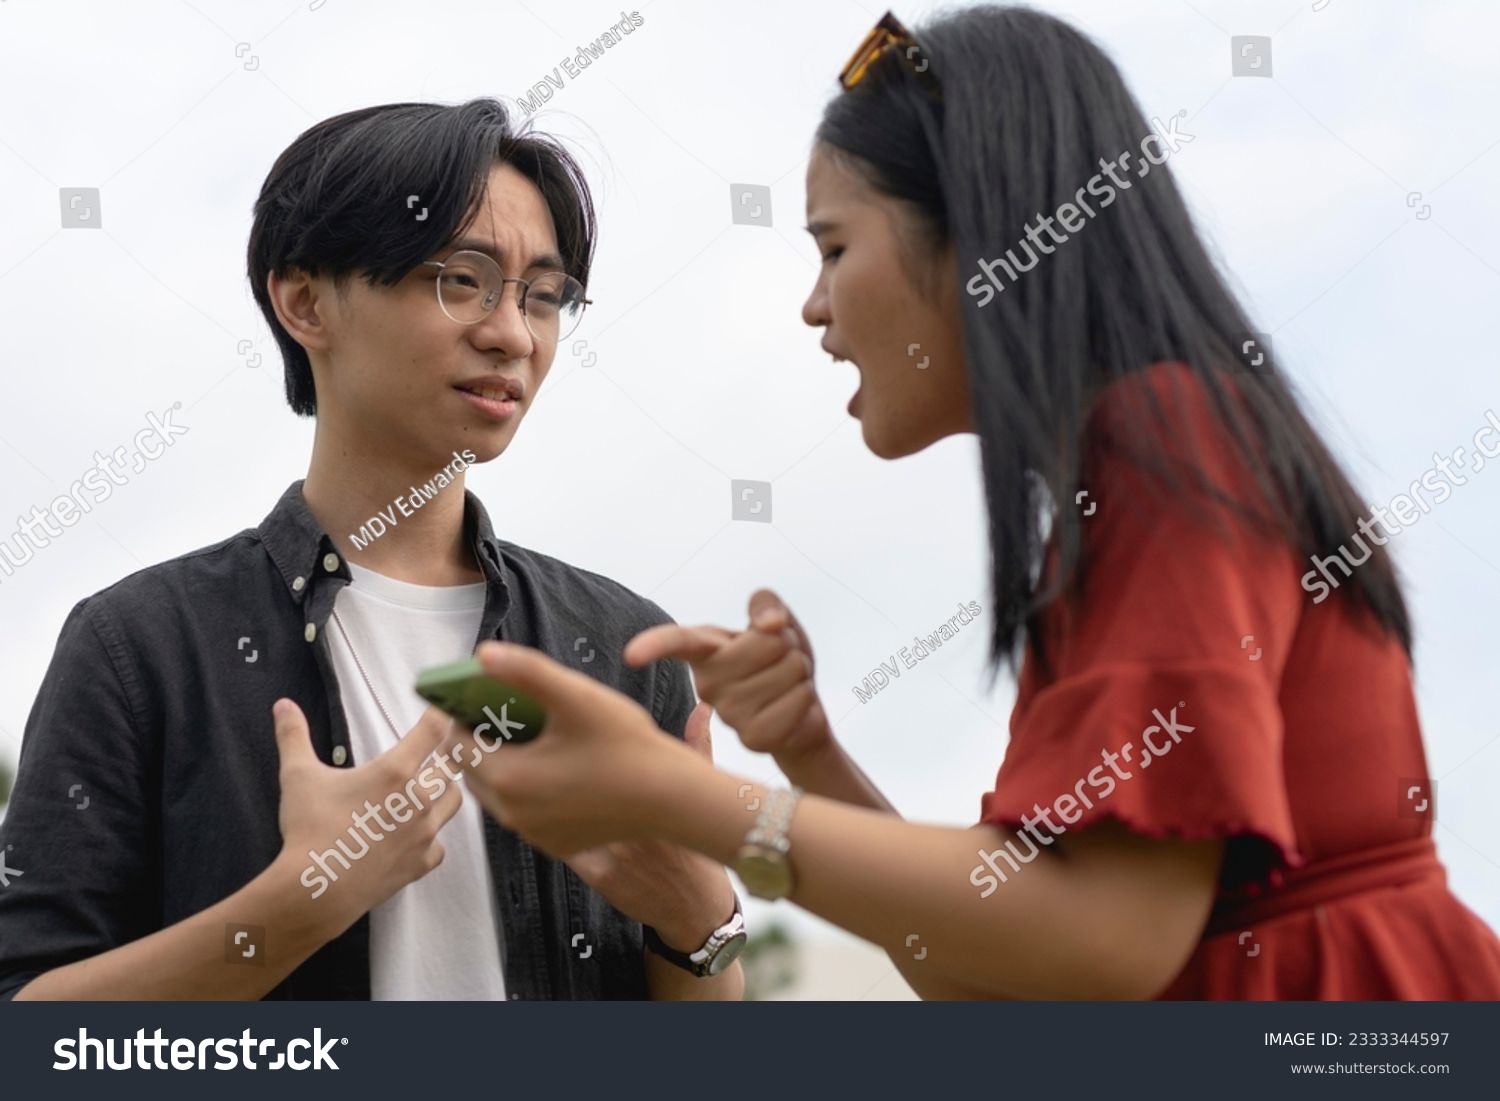 A young asian woman confronts her cheating boyfriend over a extramarital relationship with another girl on his phone. A man taken aback and surprised after getting caught red-handed. #2333344597